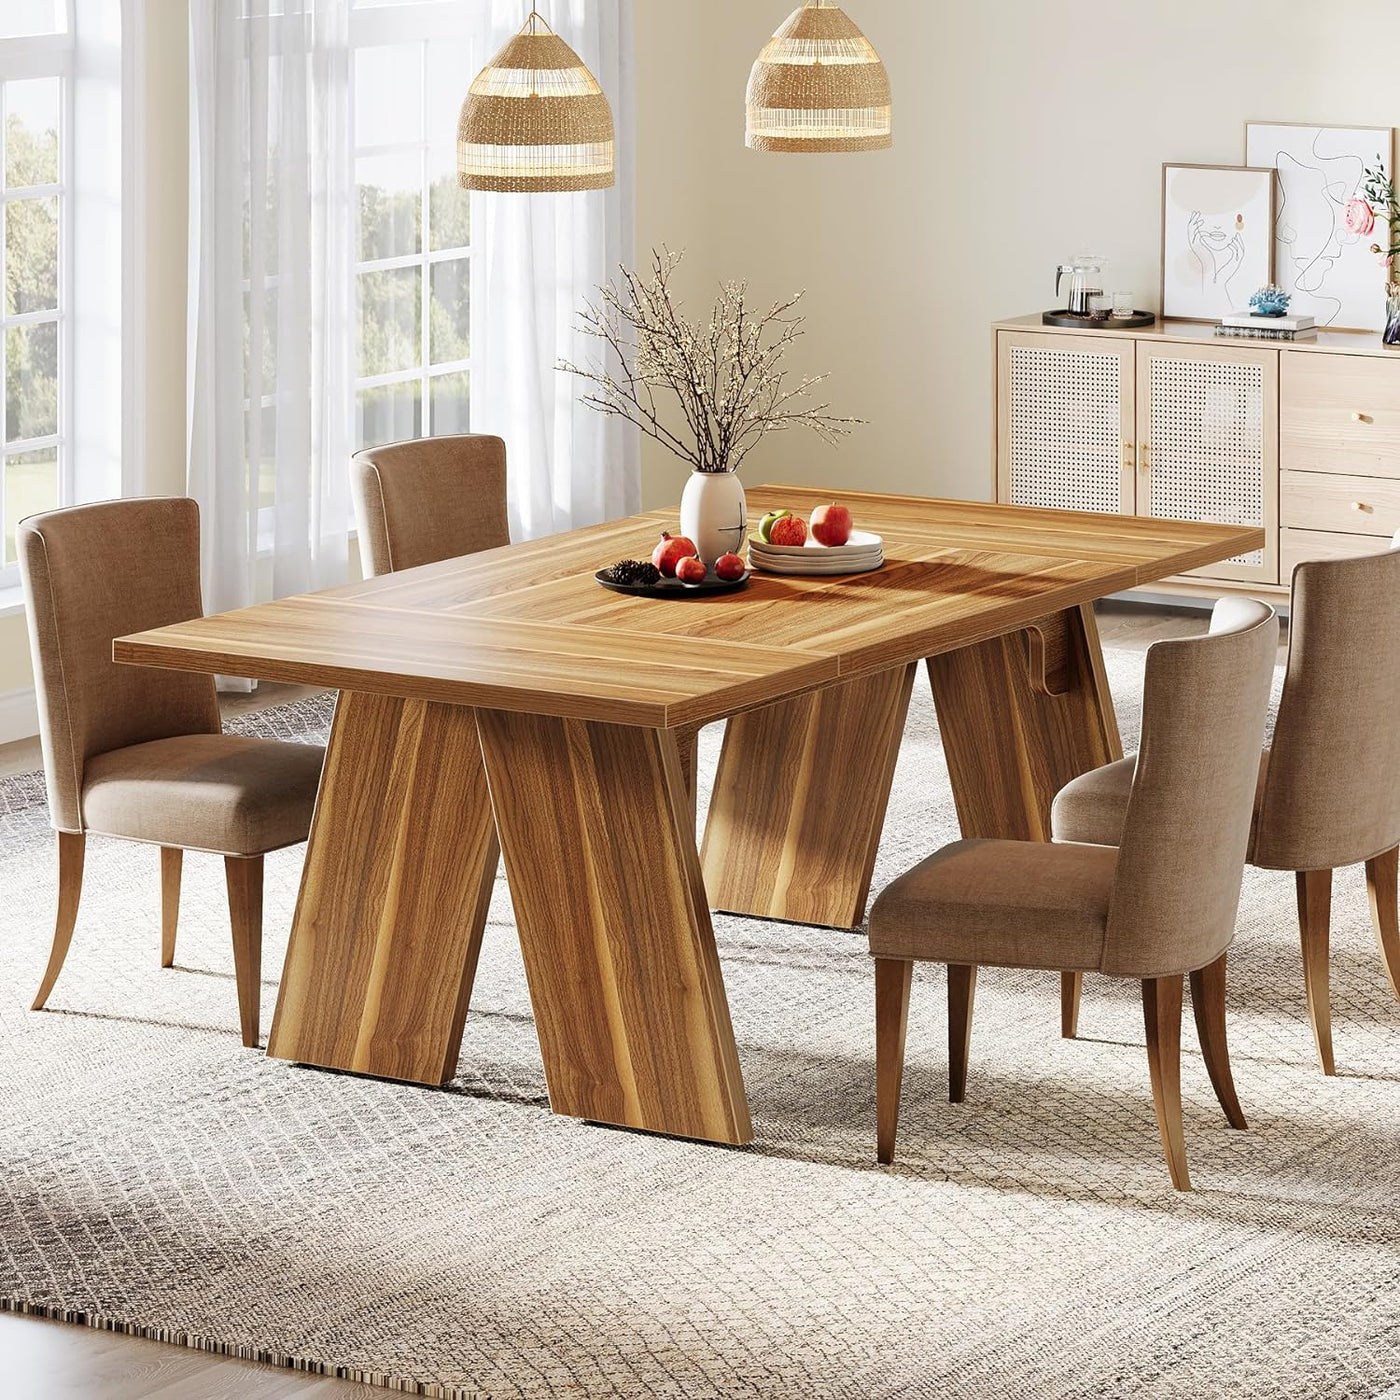 Mottre 71" Wood Dining Table | Brown Farmhouse Kitchen Table for 6 People